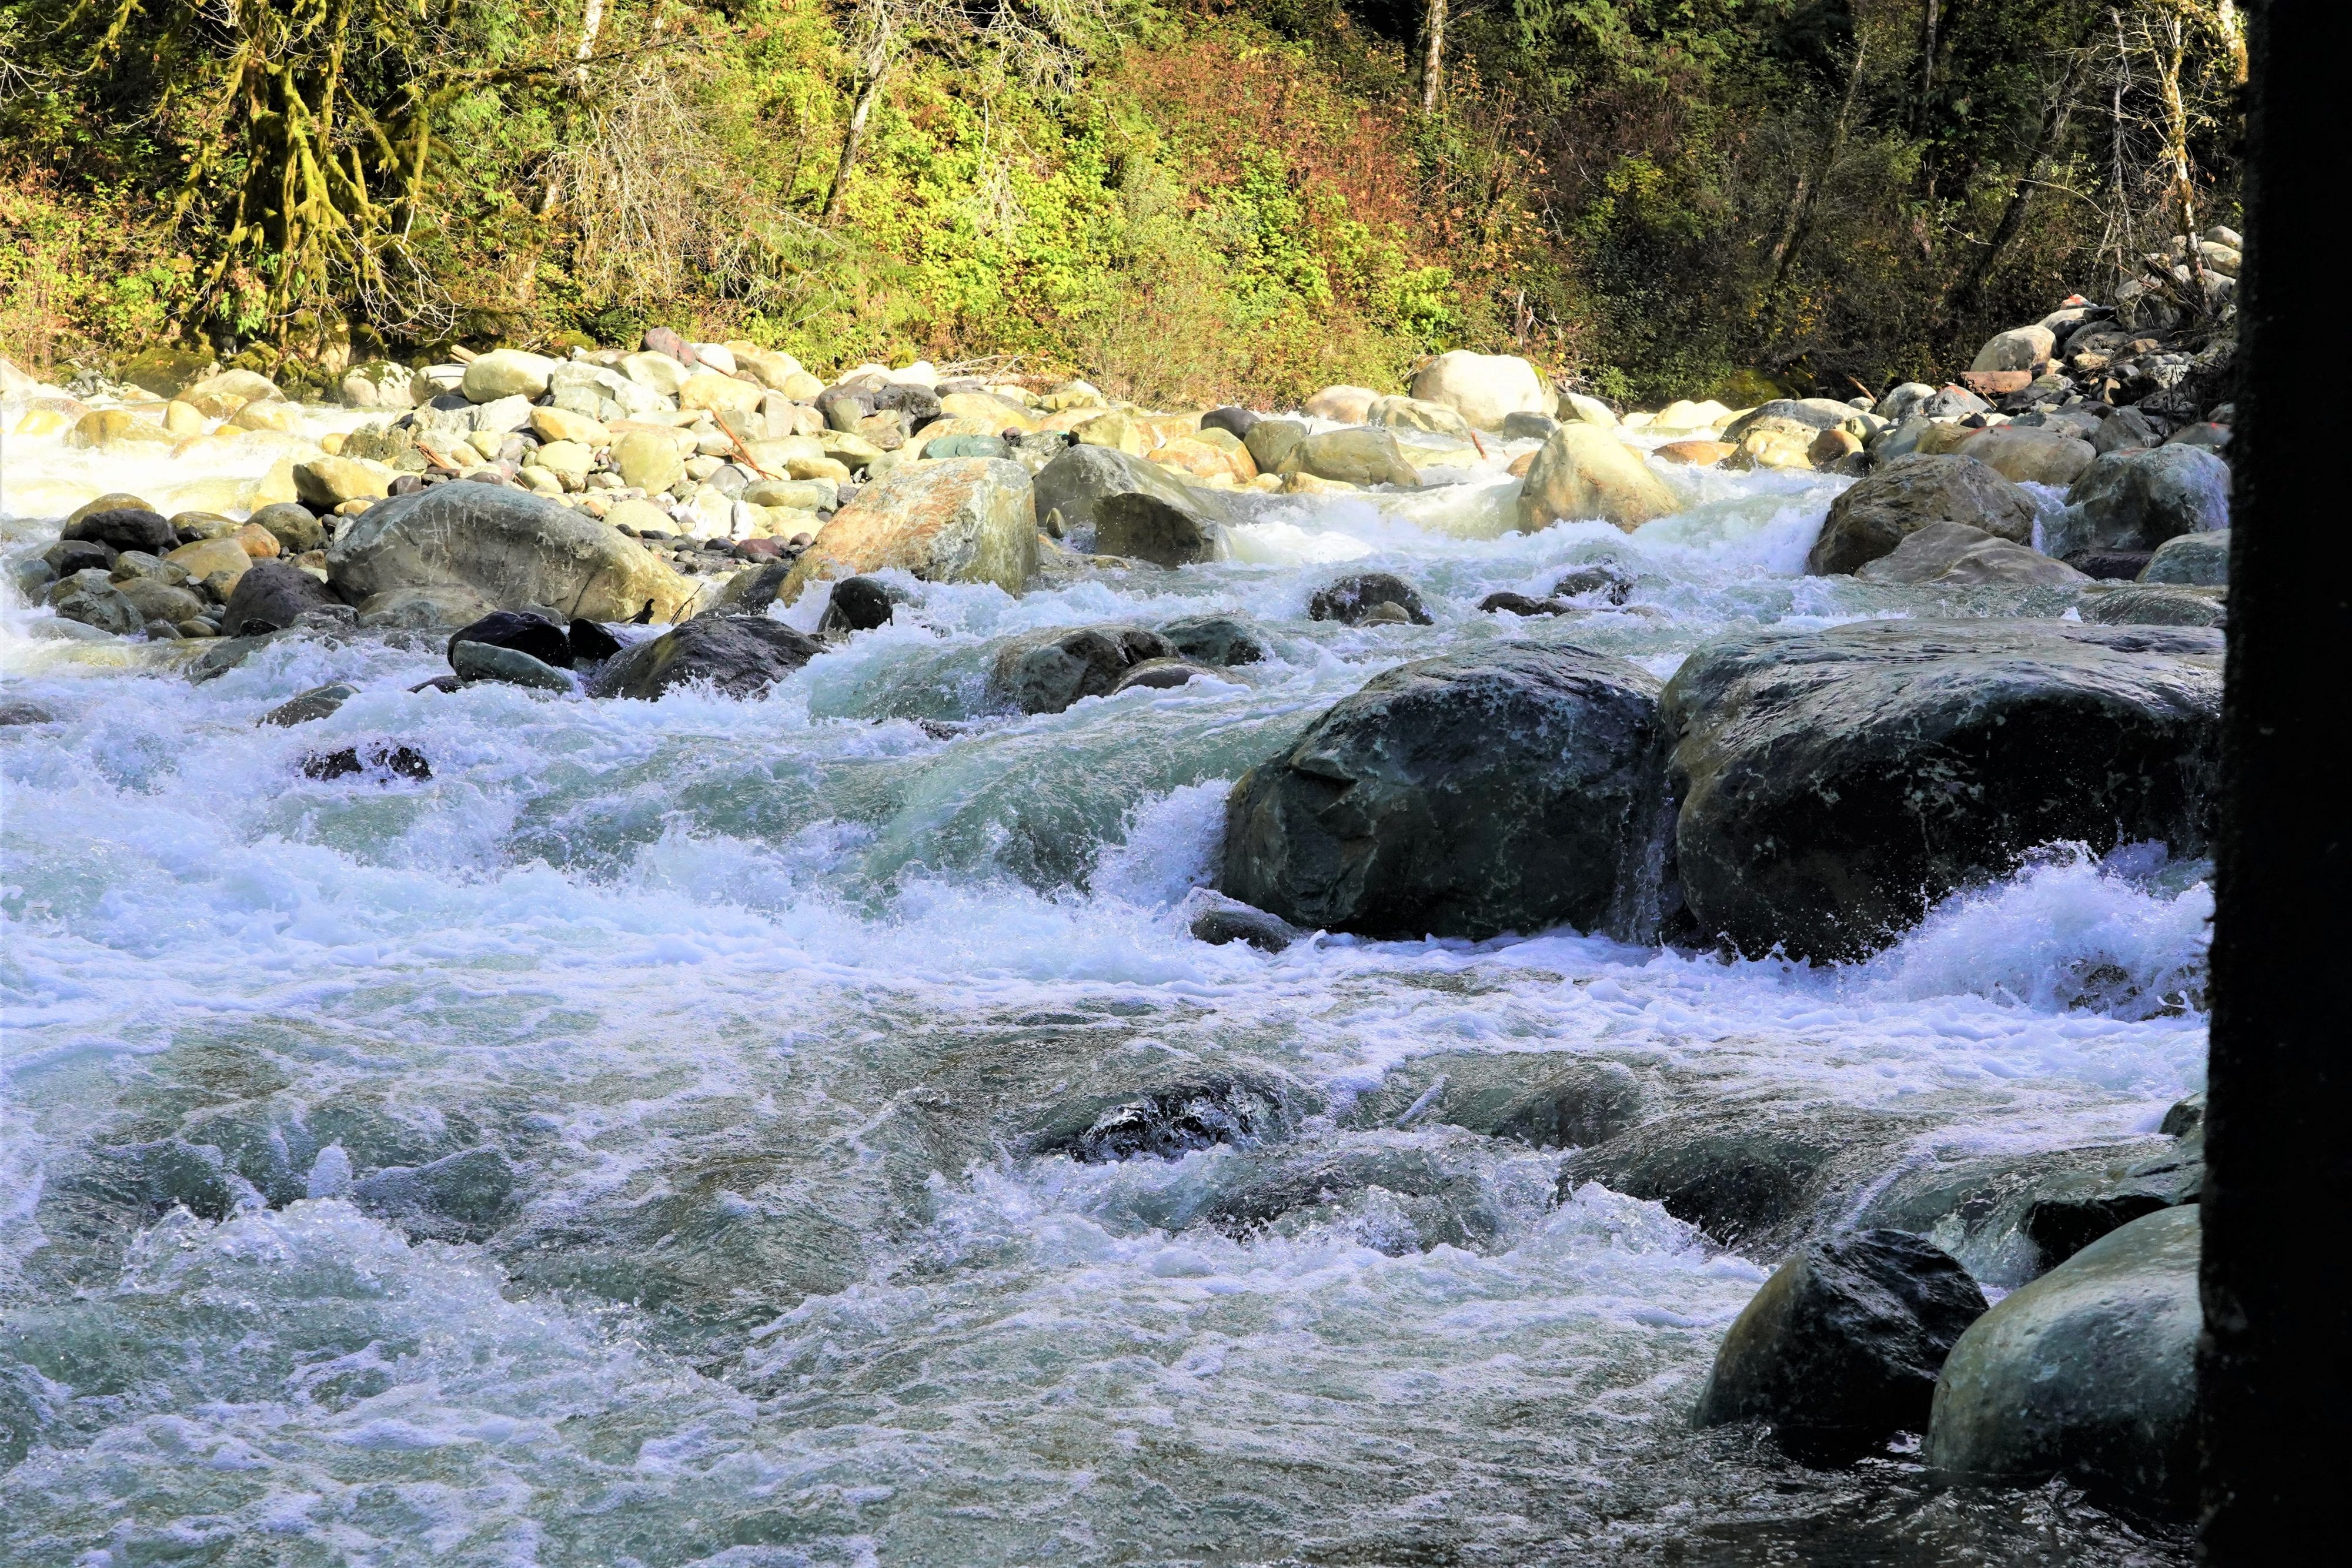 Free-flowing river with boulders